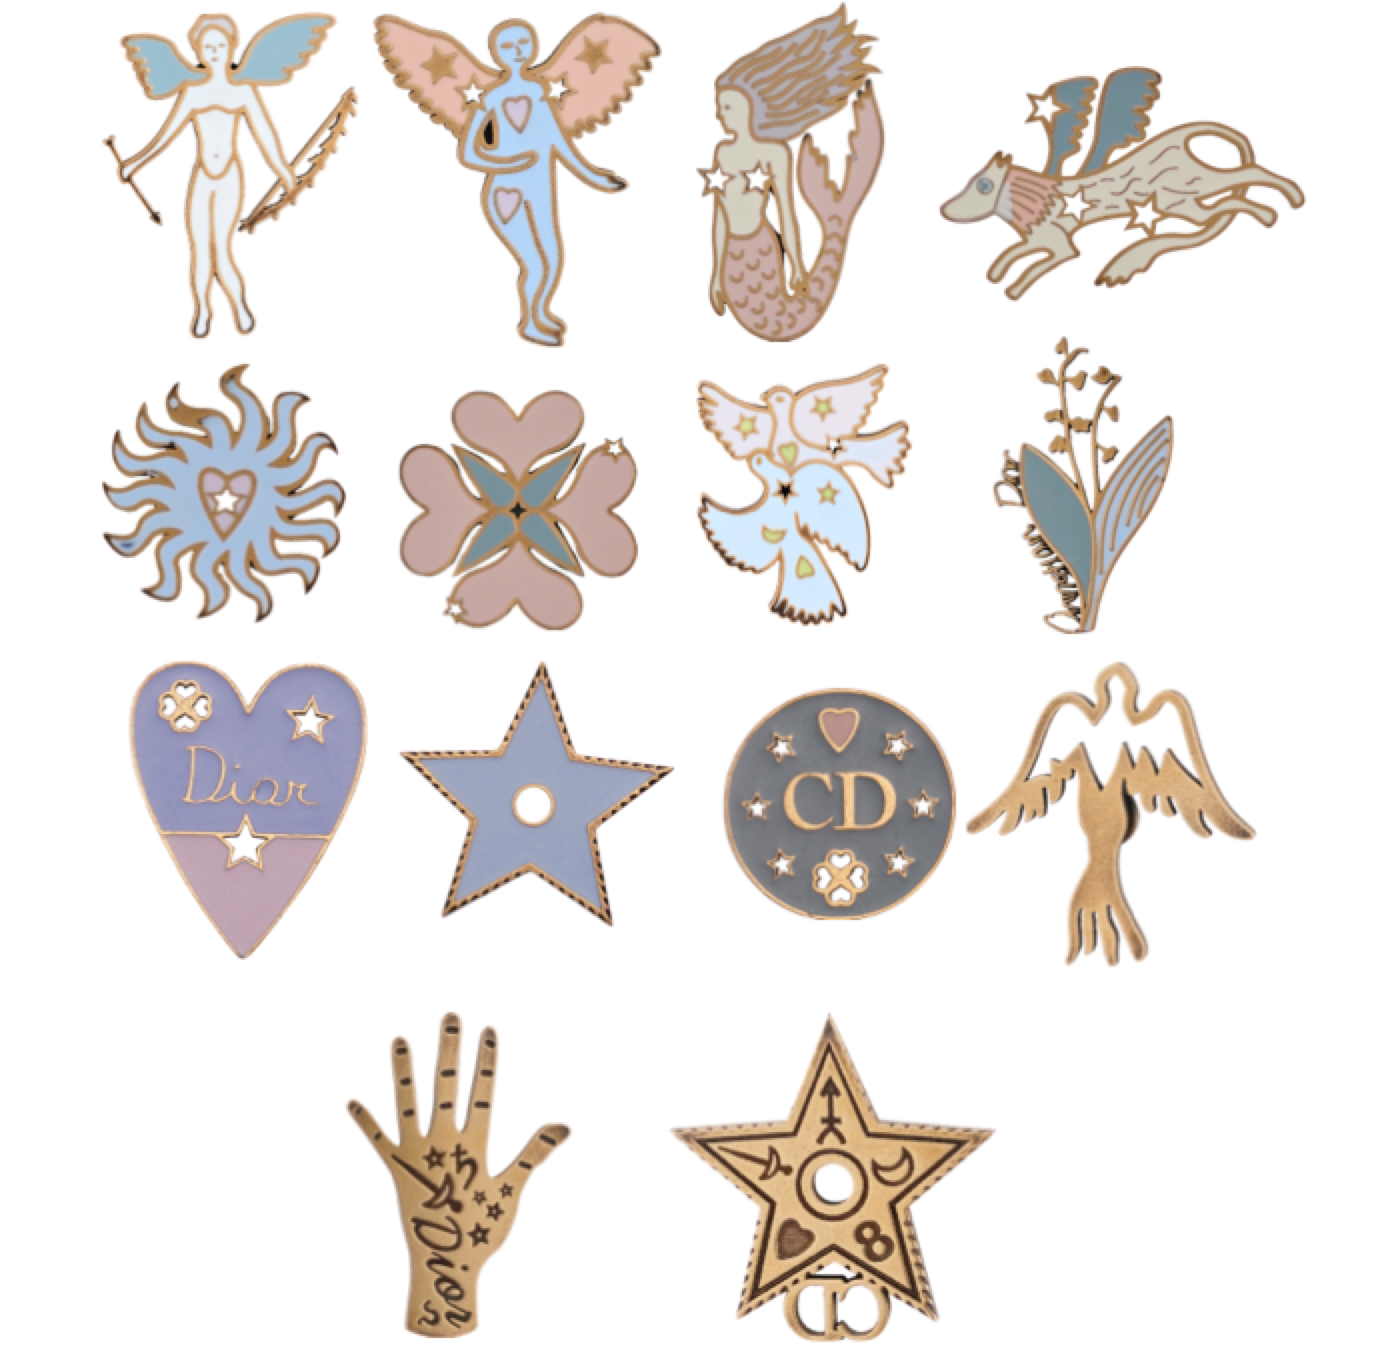 New My Lady Dior Pins Collection 